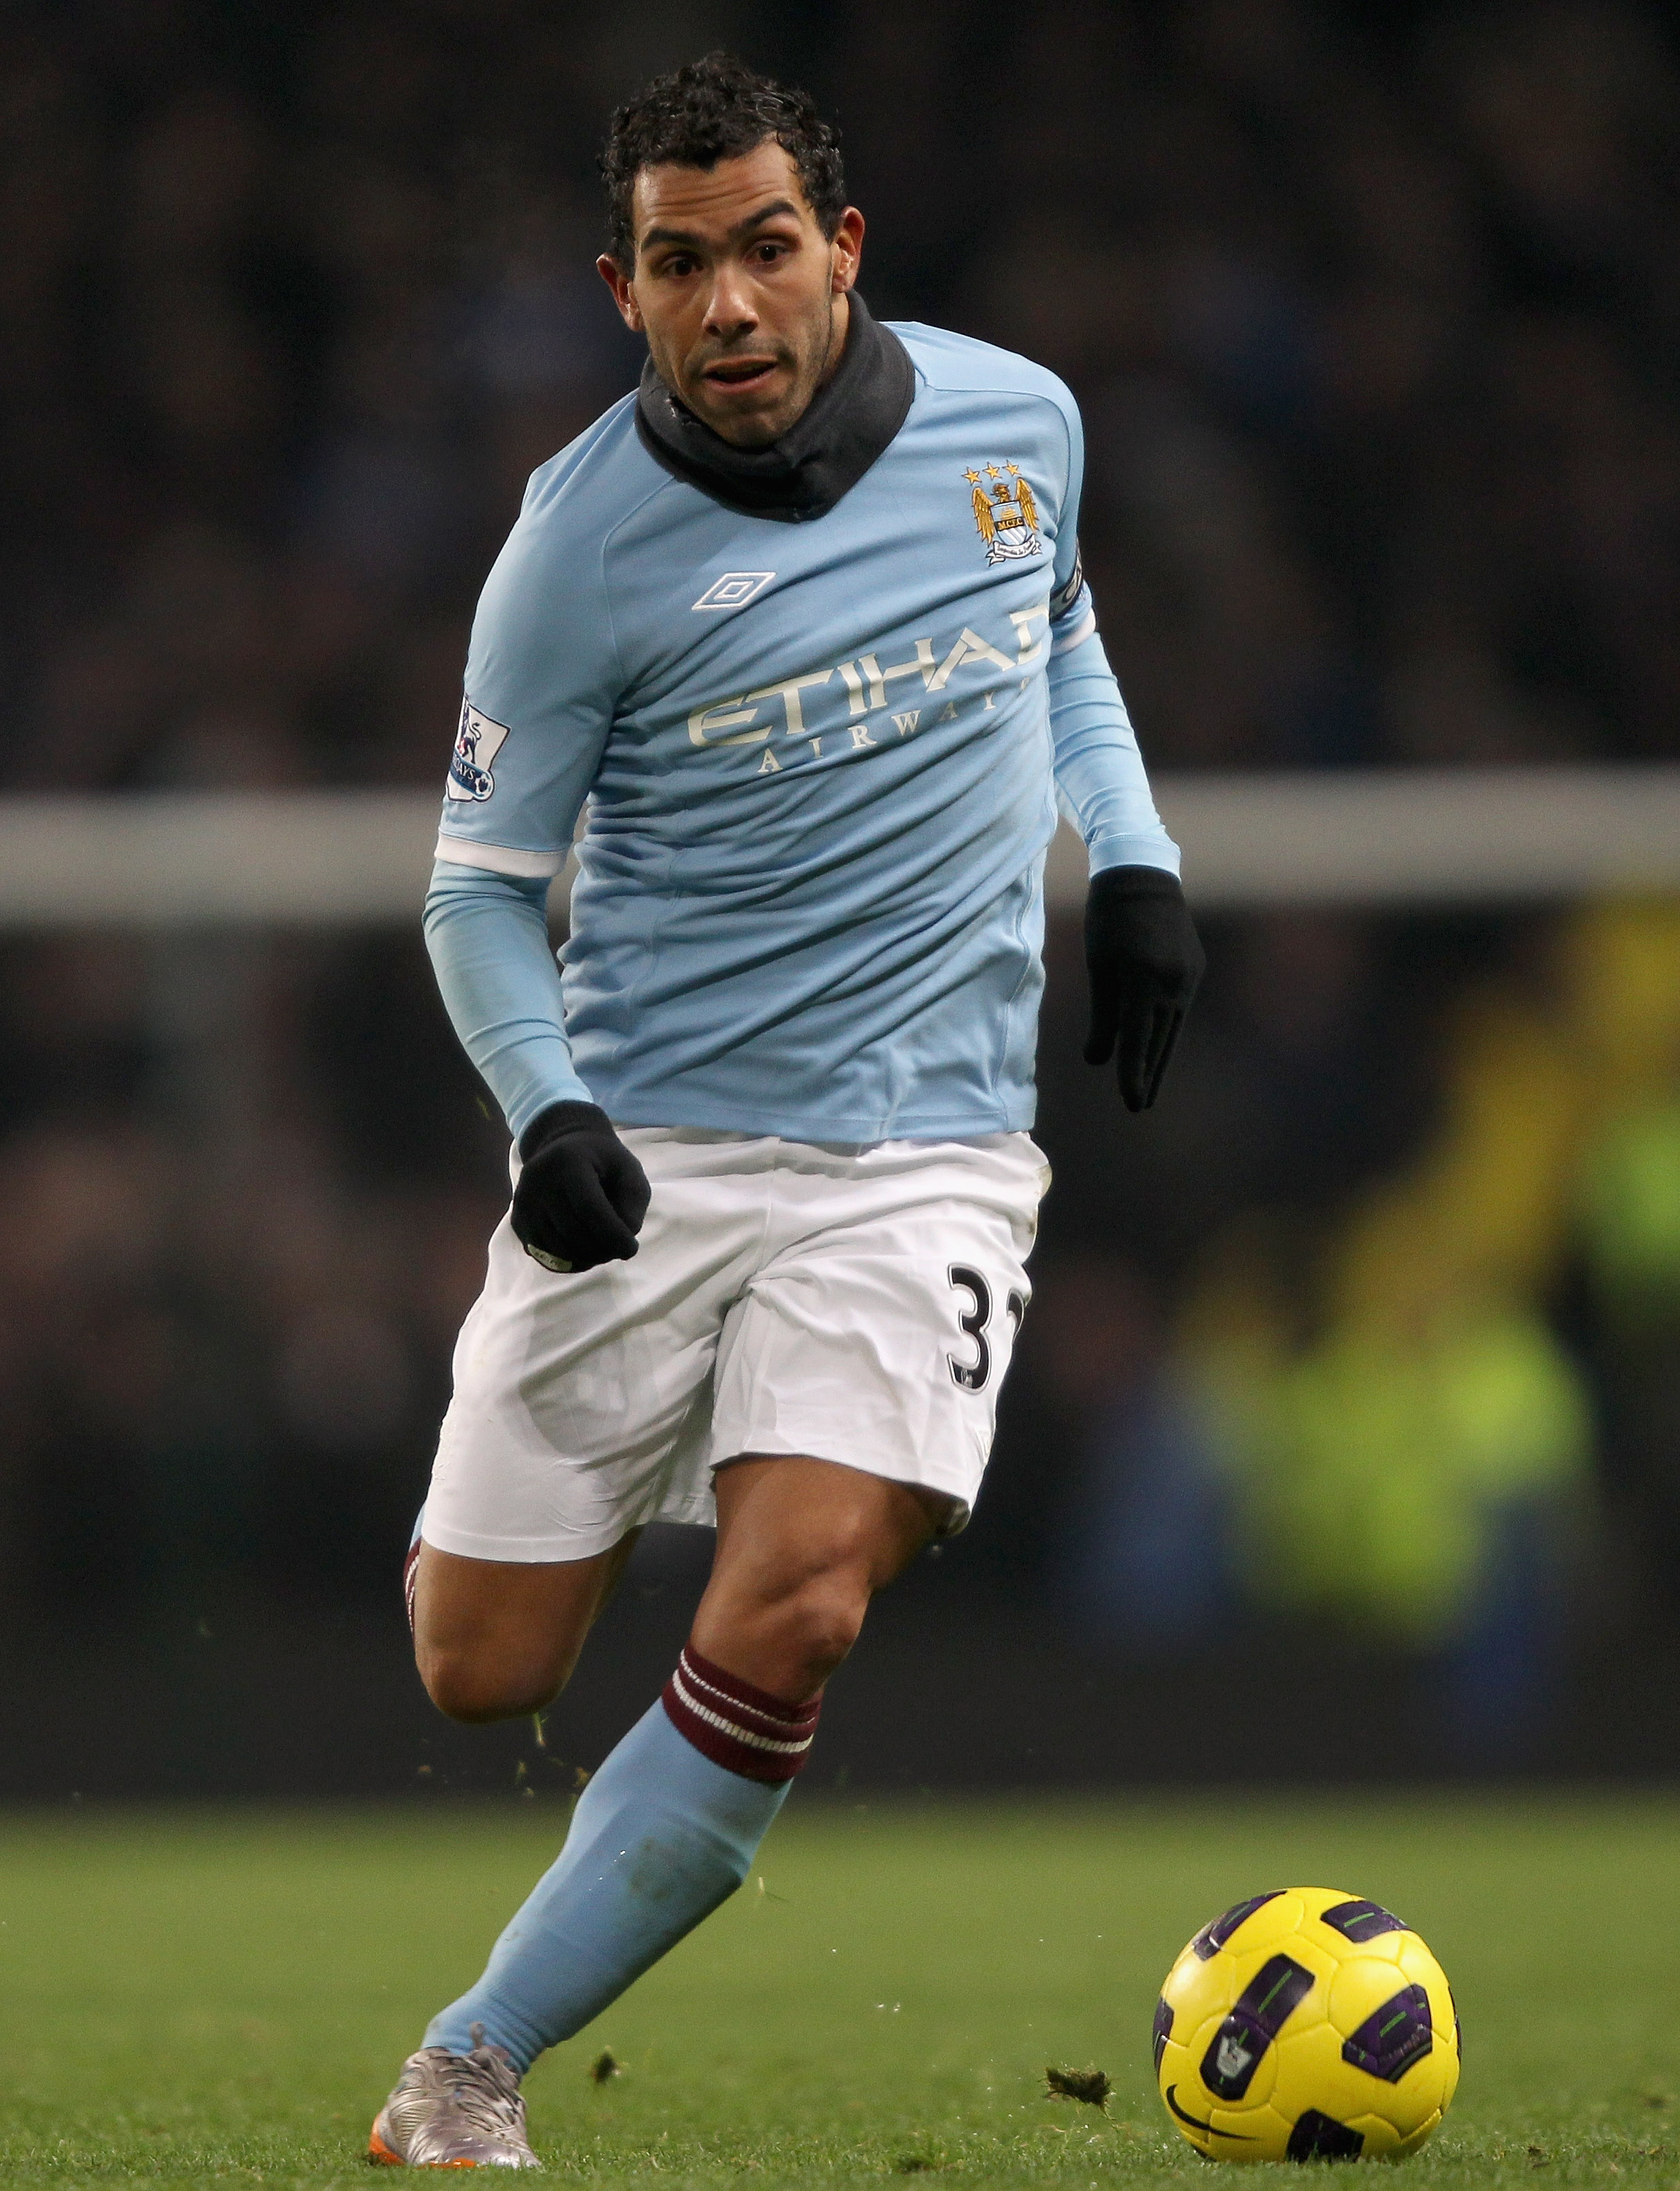 MANCHESTER, ENGLAND - DECEMBER 20:  Carlos Tevez of Manchester City in action during the Barclays Premier League match between Manchester City and Everton at City of Manchester Stadium on December 20, 2010 in Manchester, England.  (Photo by Clive Brunskil